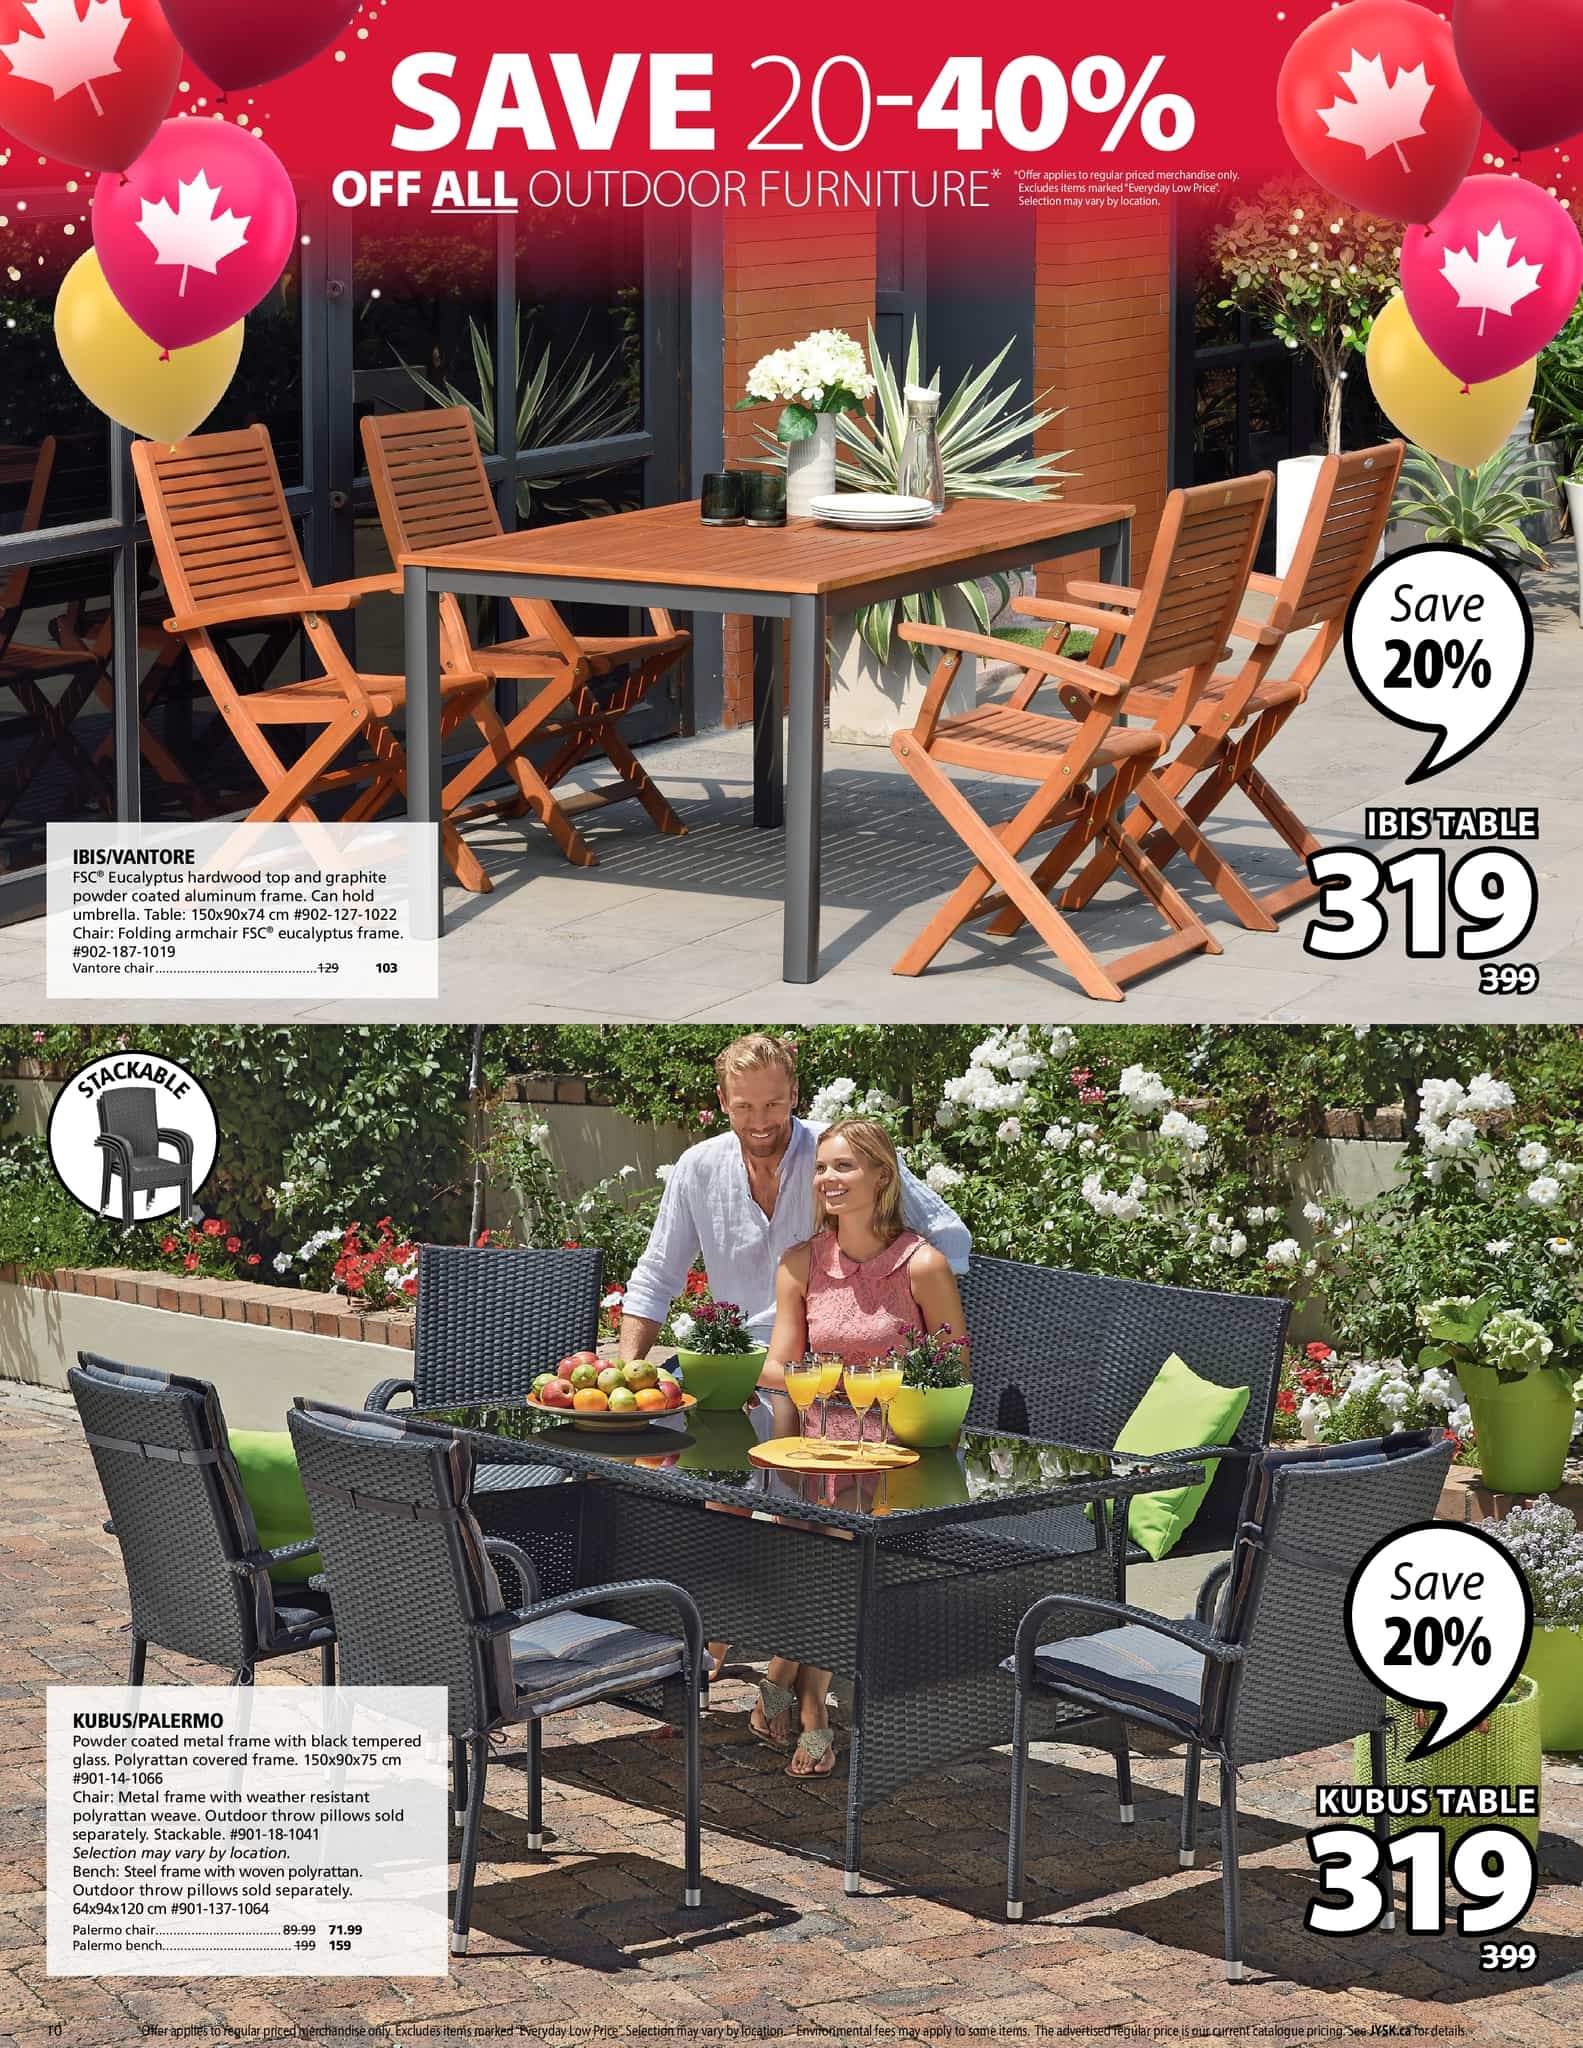 Jysk - Weekly Flyer Specials - Page 10